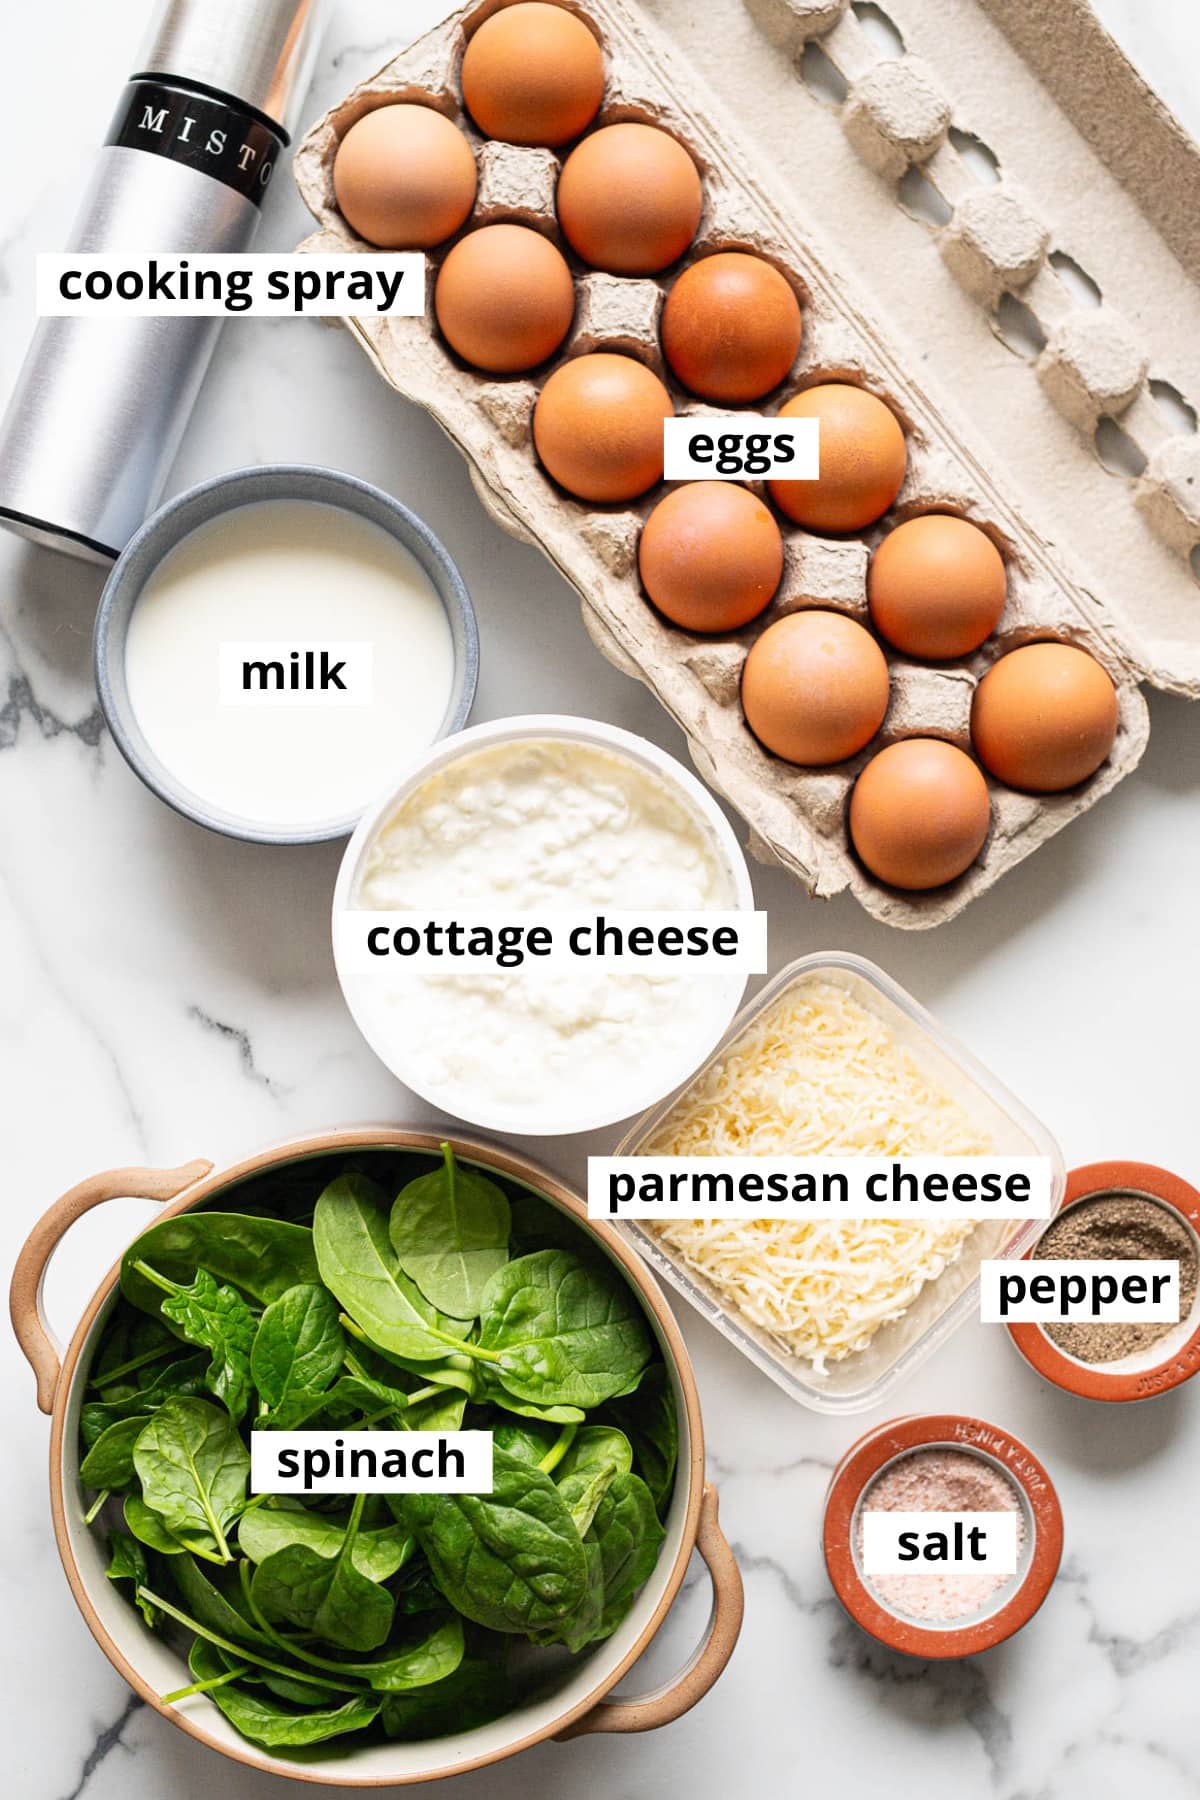 Eggs, cottage cheese, milk, parmesan cheese, cooking spray, spinach, salt and pepper.